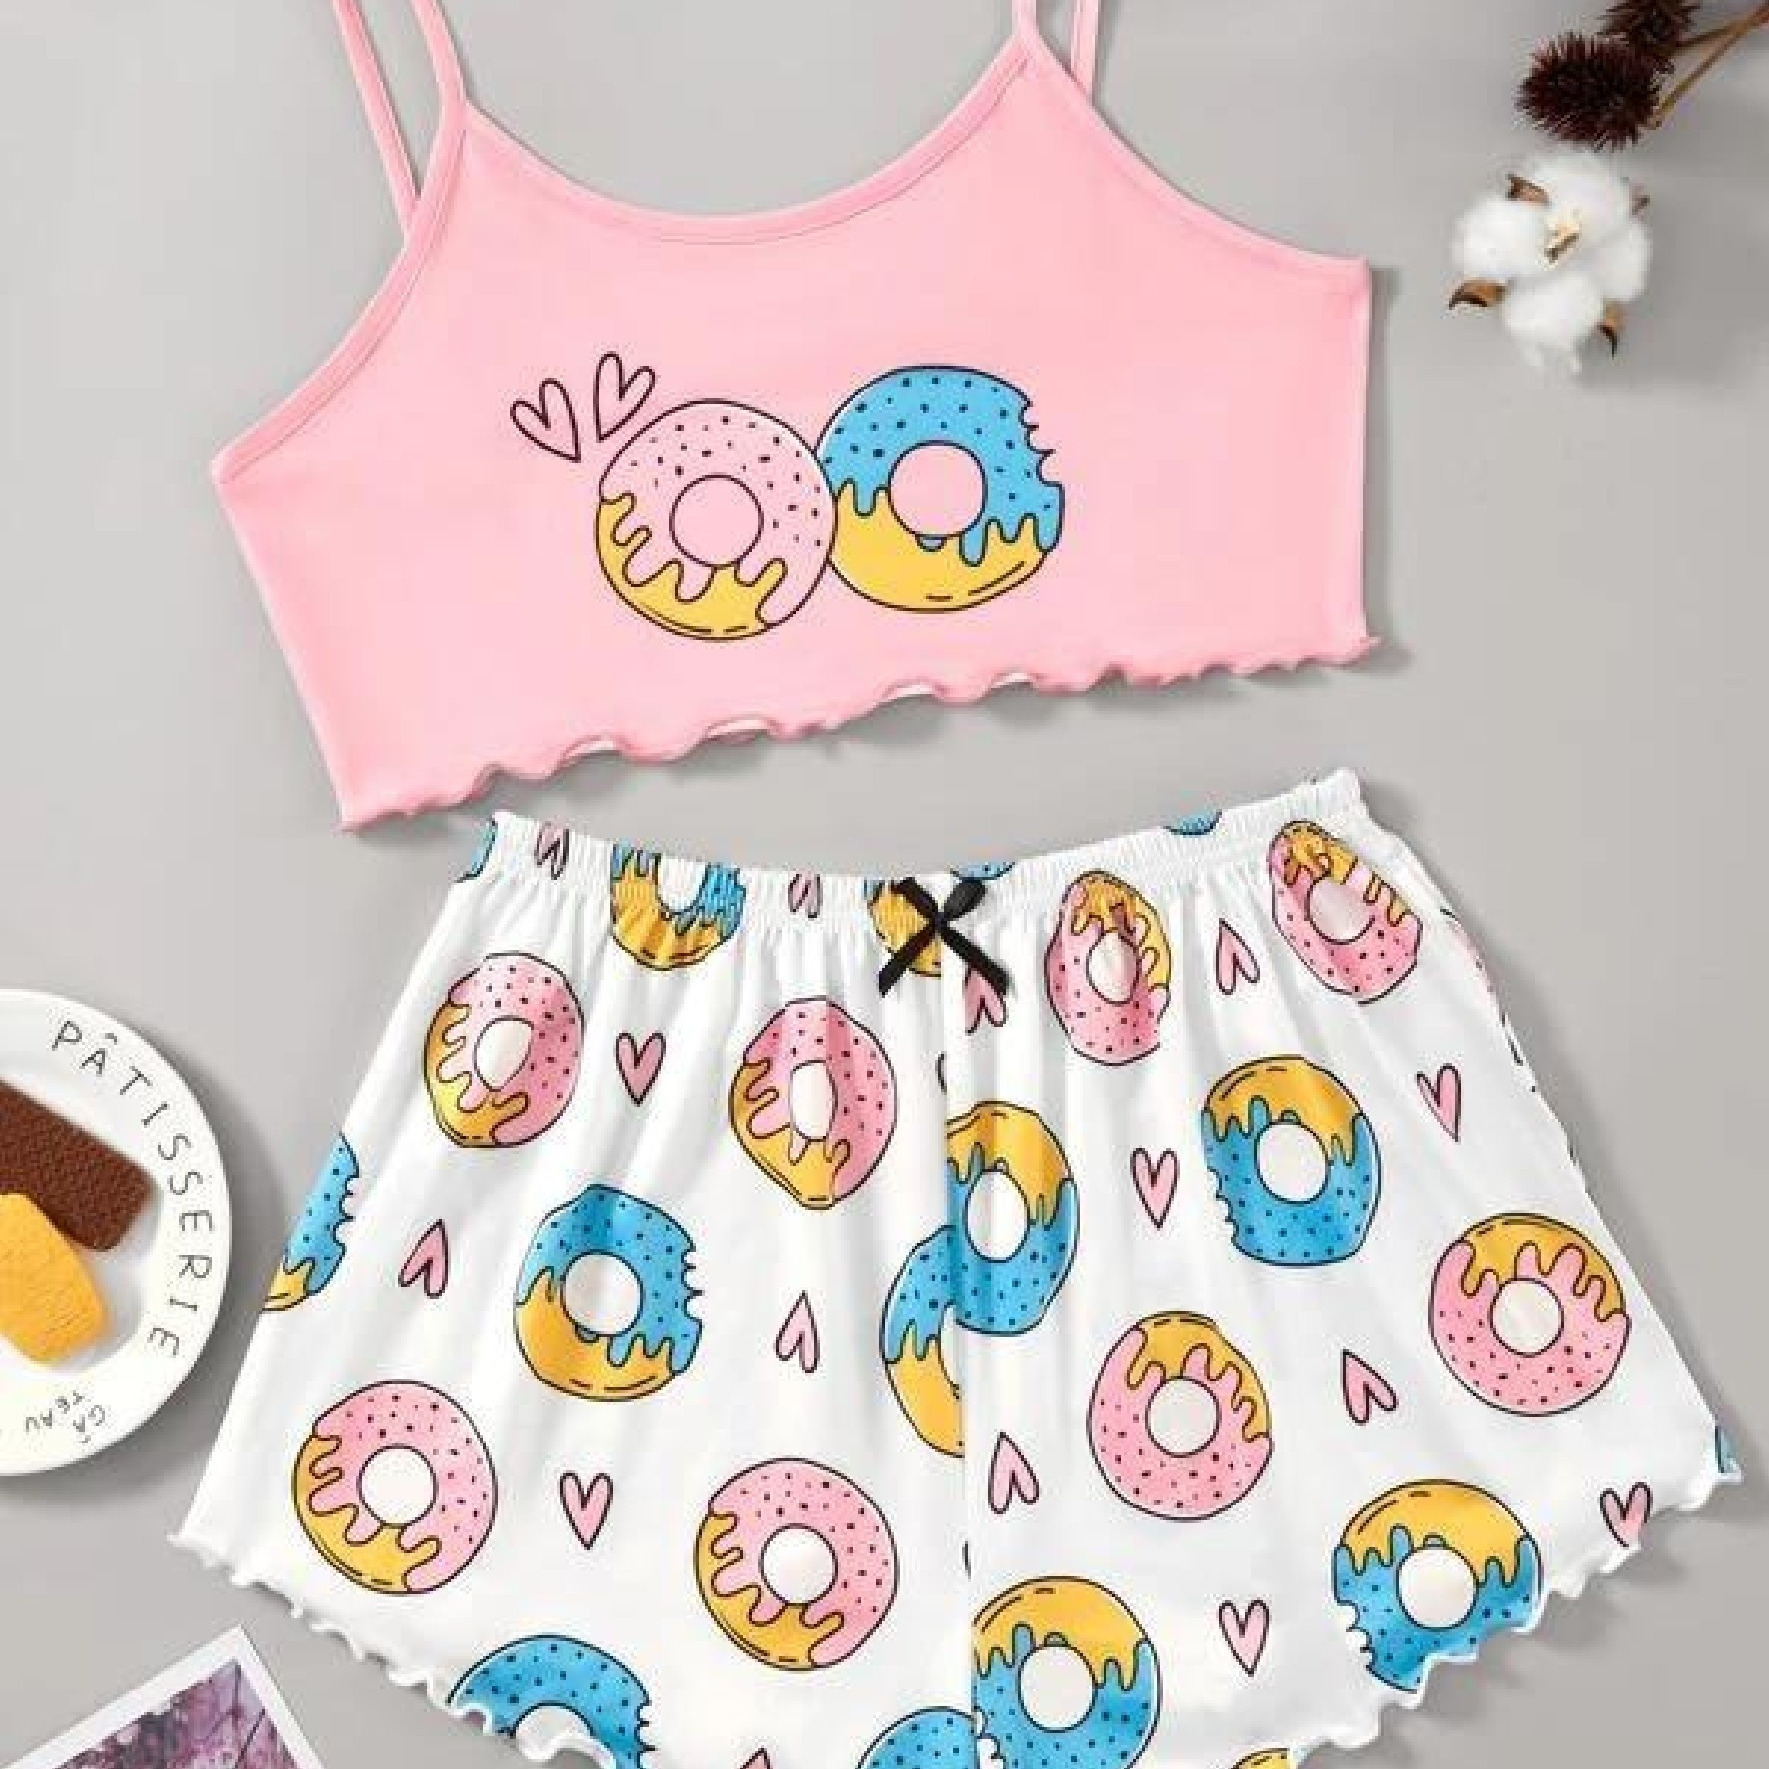 

Women's Sleepwear Two-piece Sets, Cute Food Print Cami Tops & Shorts Pajama Set For Valentine's Gifts